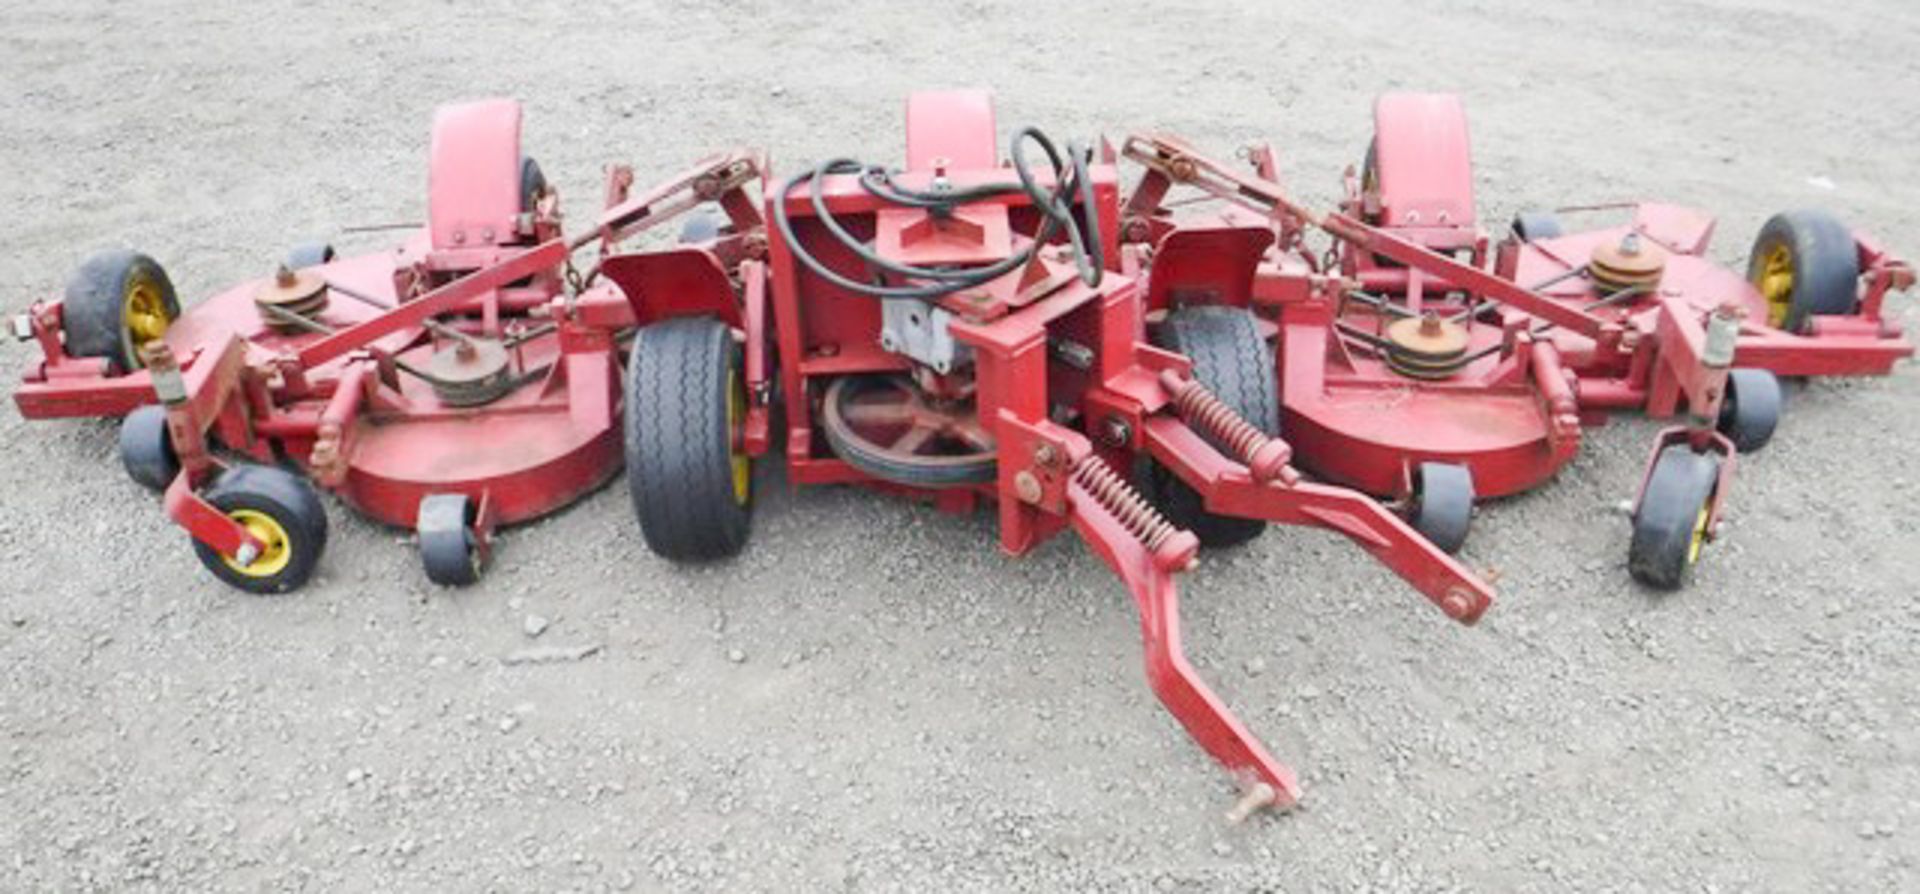 LASTEC ARTICULATOR, 7 DECKED PTO DRIVEN GRASS CUTTER WITH HYDRAULIC LIFT - Image 4 of 7